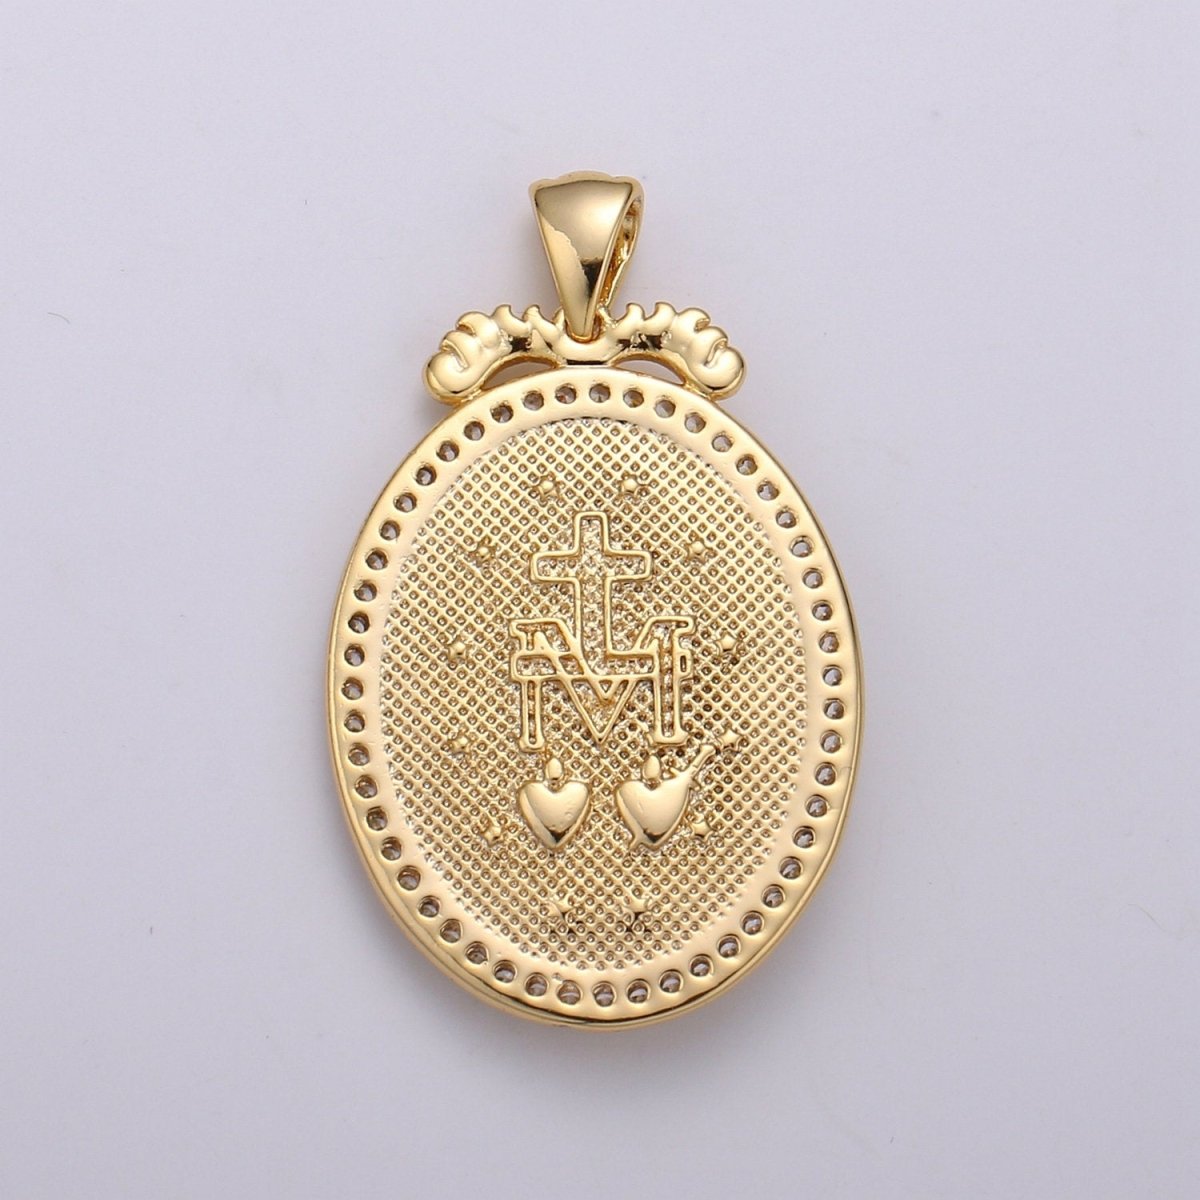 Micro Pave Virgin Mary Pendant Holly Mary 14K Gold Filled Charm Religious medallion, oval pendant, Mother Maria, religious jewelry J-120 - DLUXCA